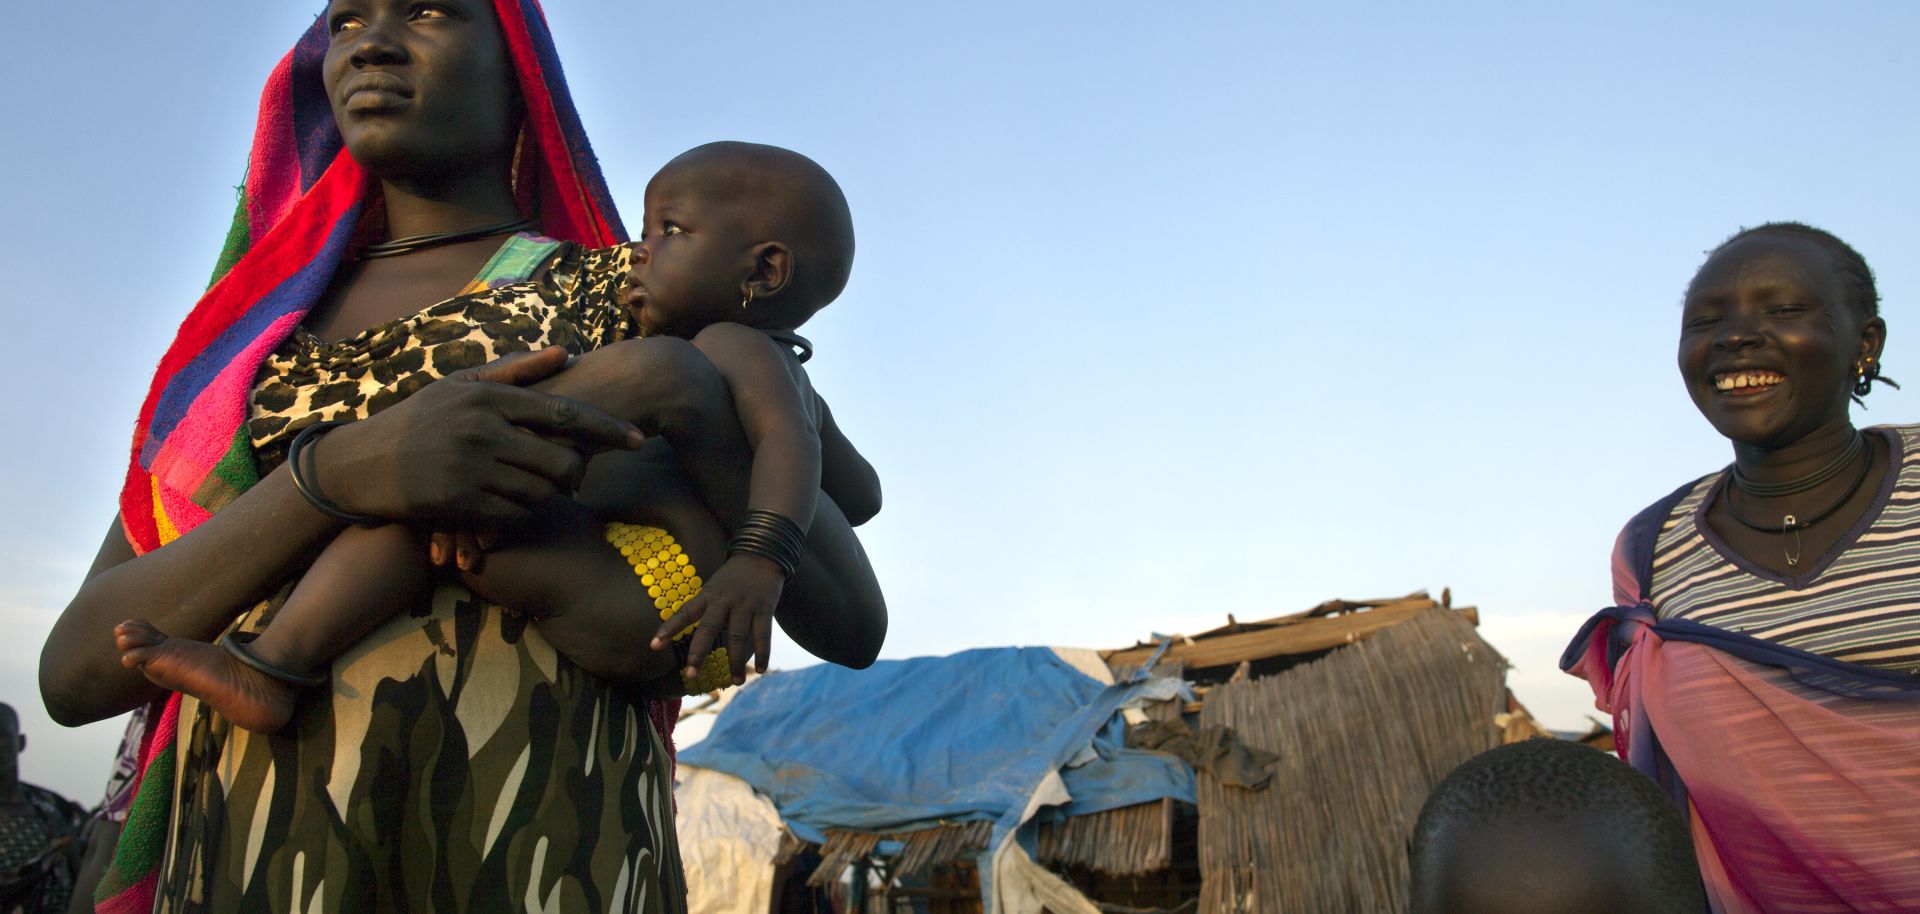  A woman from the Dinka tribe stands with her baby at a small settlement outside the city center